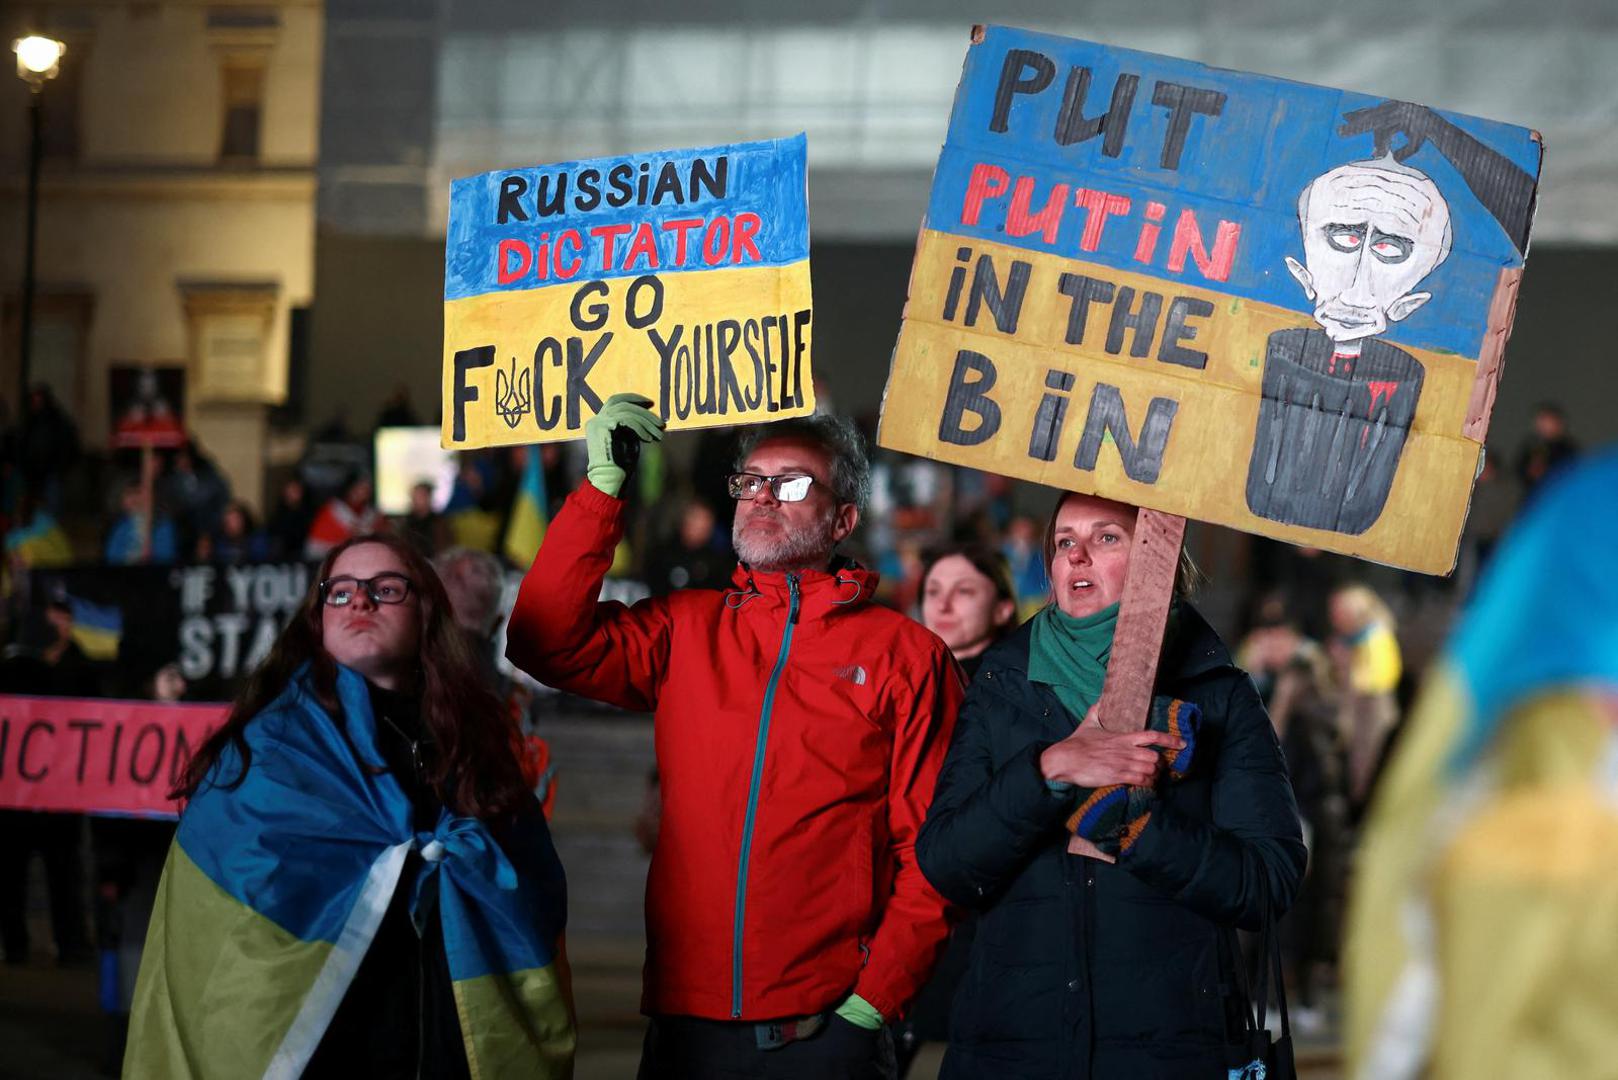 SENSITIVE MATERIAL. THIS IMAGE MAY OFFEND OR DISTURB    People attend a vigil for Ukraine held on the anniversary of the conflict with Russia, at Trafalgar Square in London, Britain February 23, 2023. REUTERS/Henry Nicholls Photo: Henry Nicholls/REUTERS